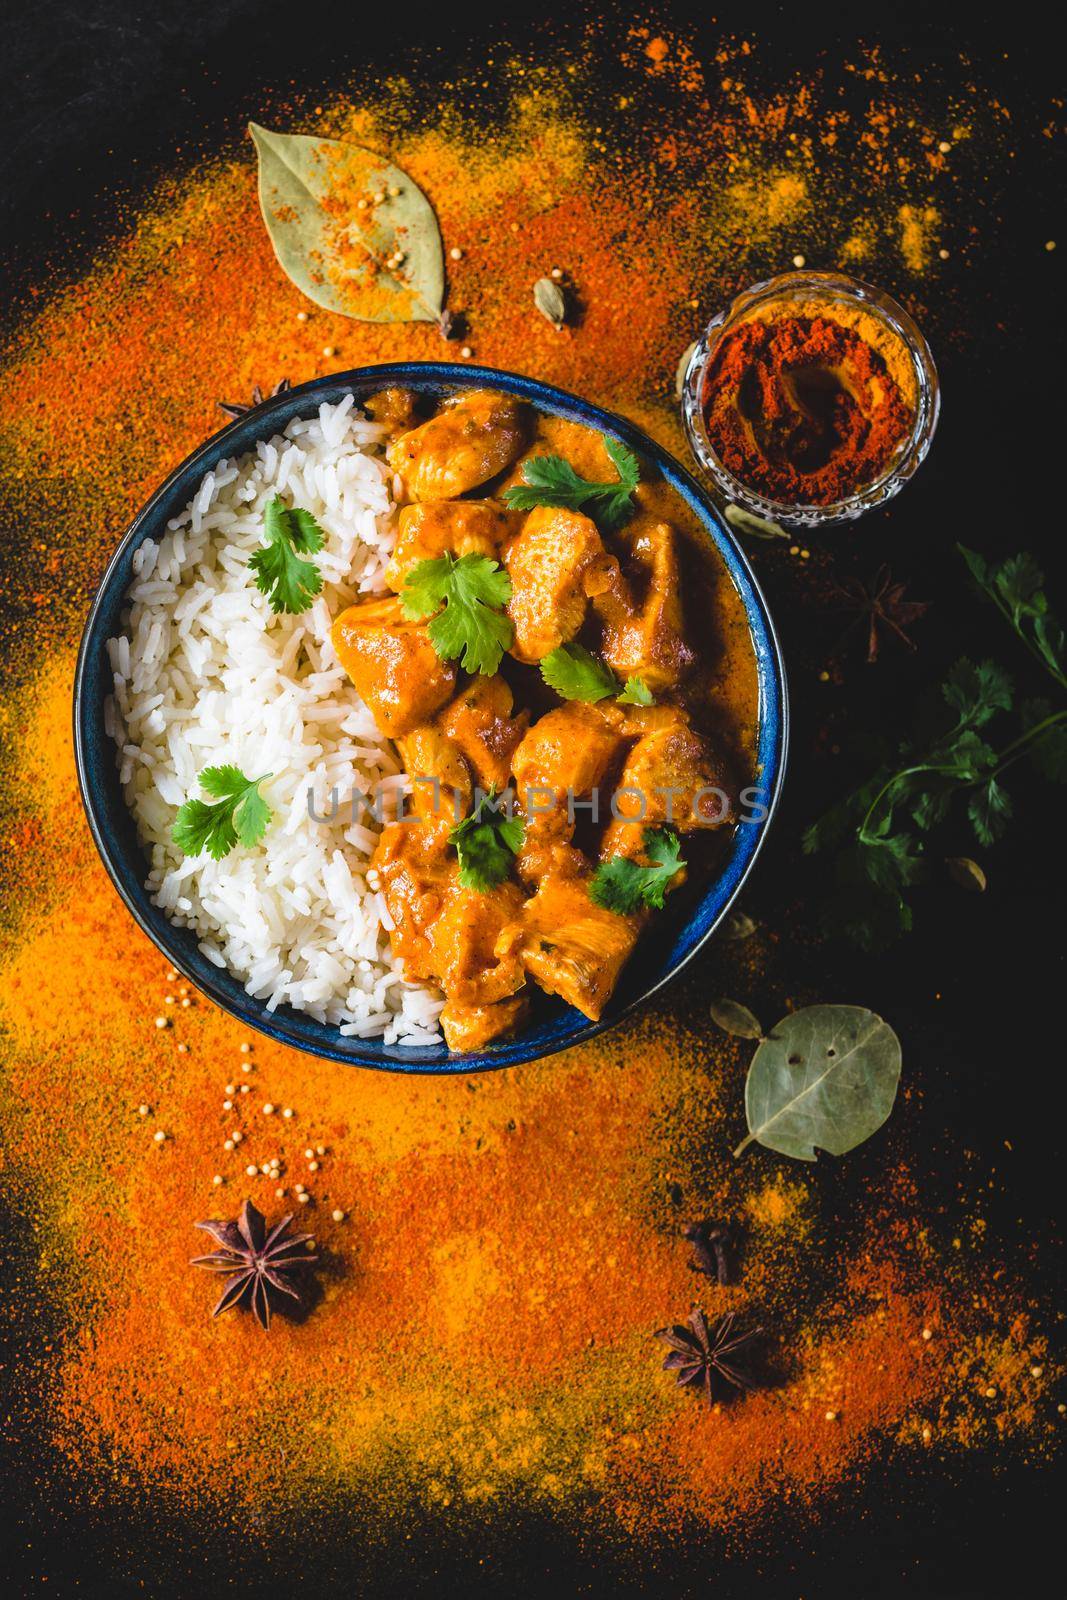 Indian Butter chicken with basmati rice, bowl, spices, black background. Indian style dinner. Butter chicken, traditional Indian dish. Top view. Chicken tikka masala. Indian cuisine concept. Overhead